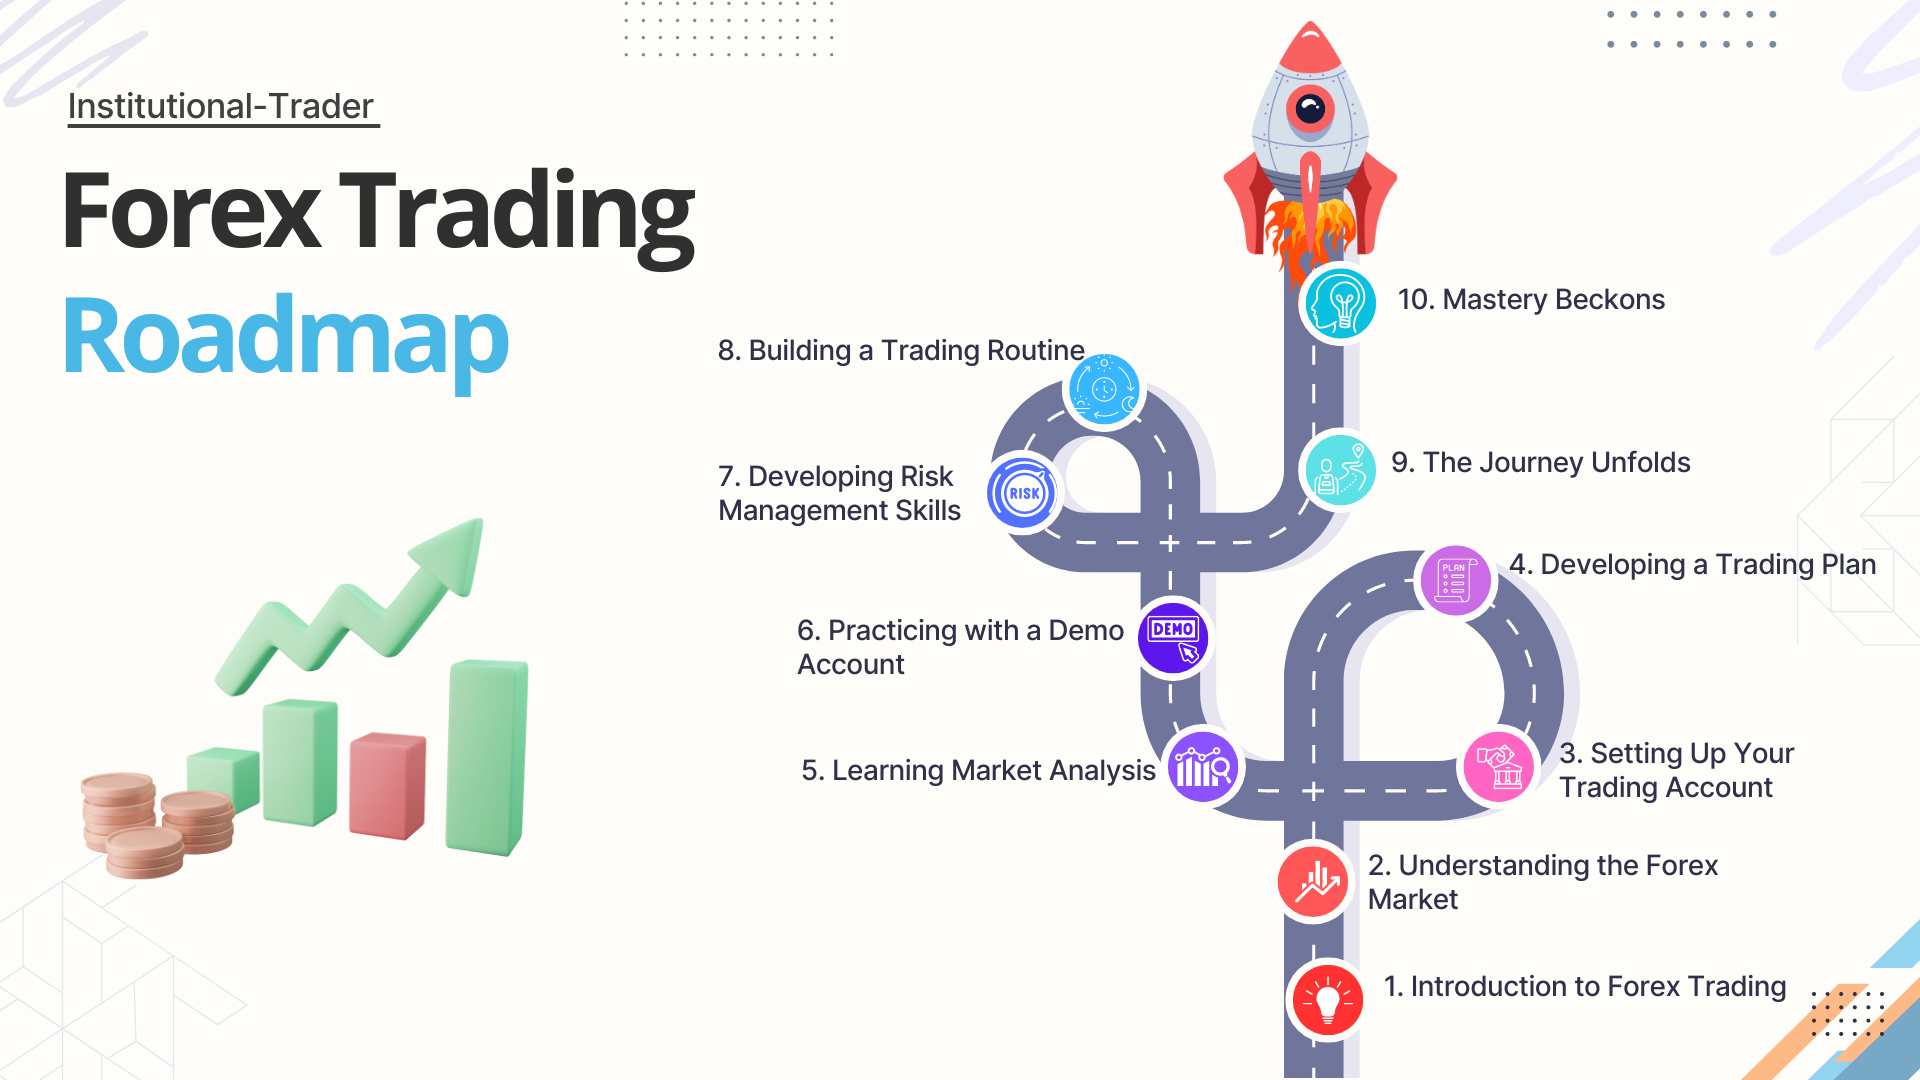 The Forex Trading Roadmap